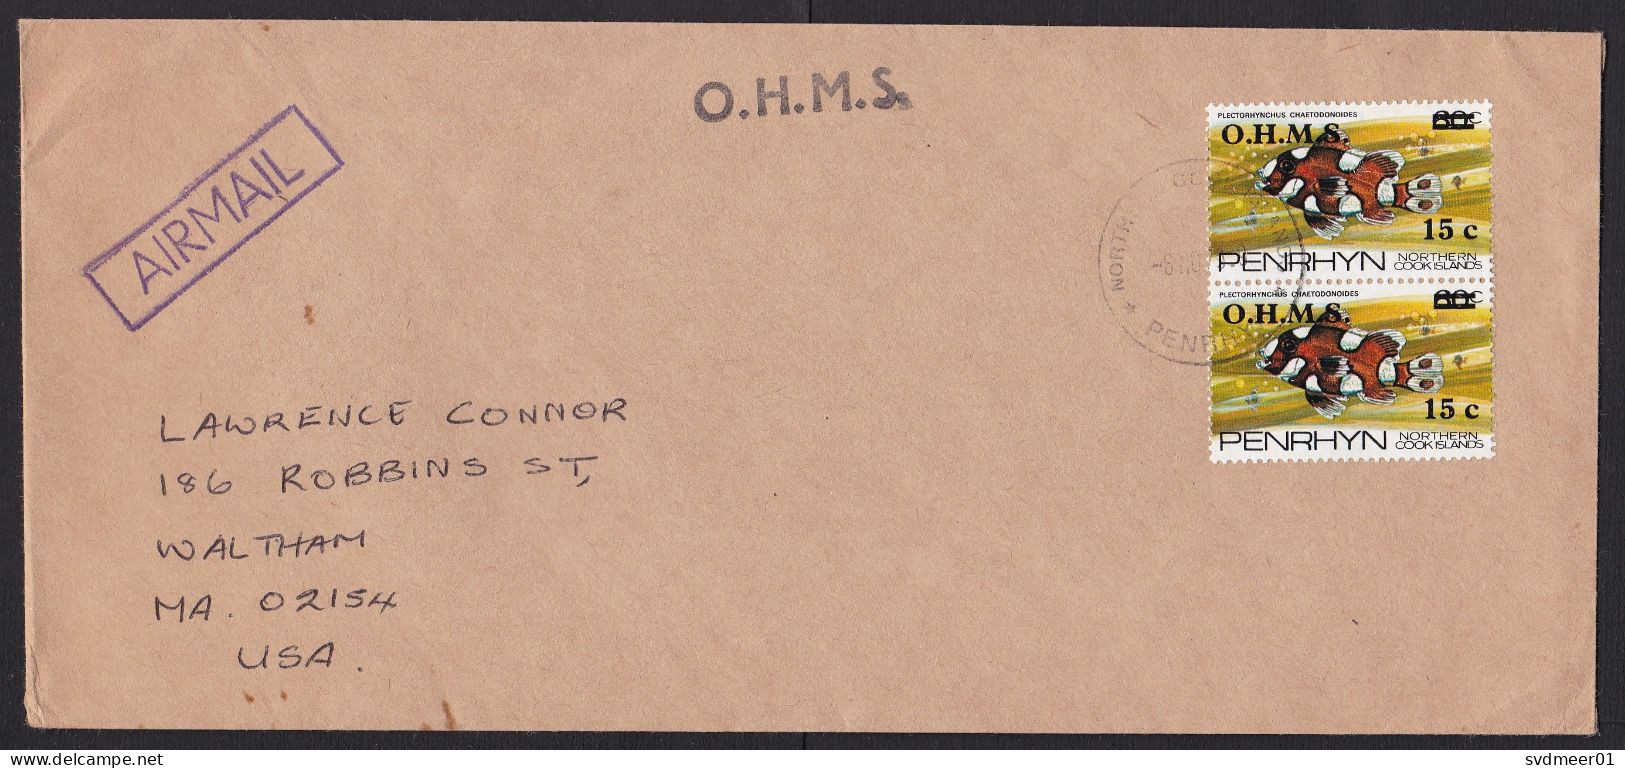 Penrhyn: Airmail Cover To USA, 2 Stamps,  Fish, Sea Animal, Value Overprint, OHMS, Official Service (minor Stain) - Penrhyn